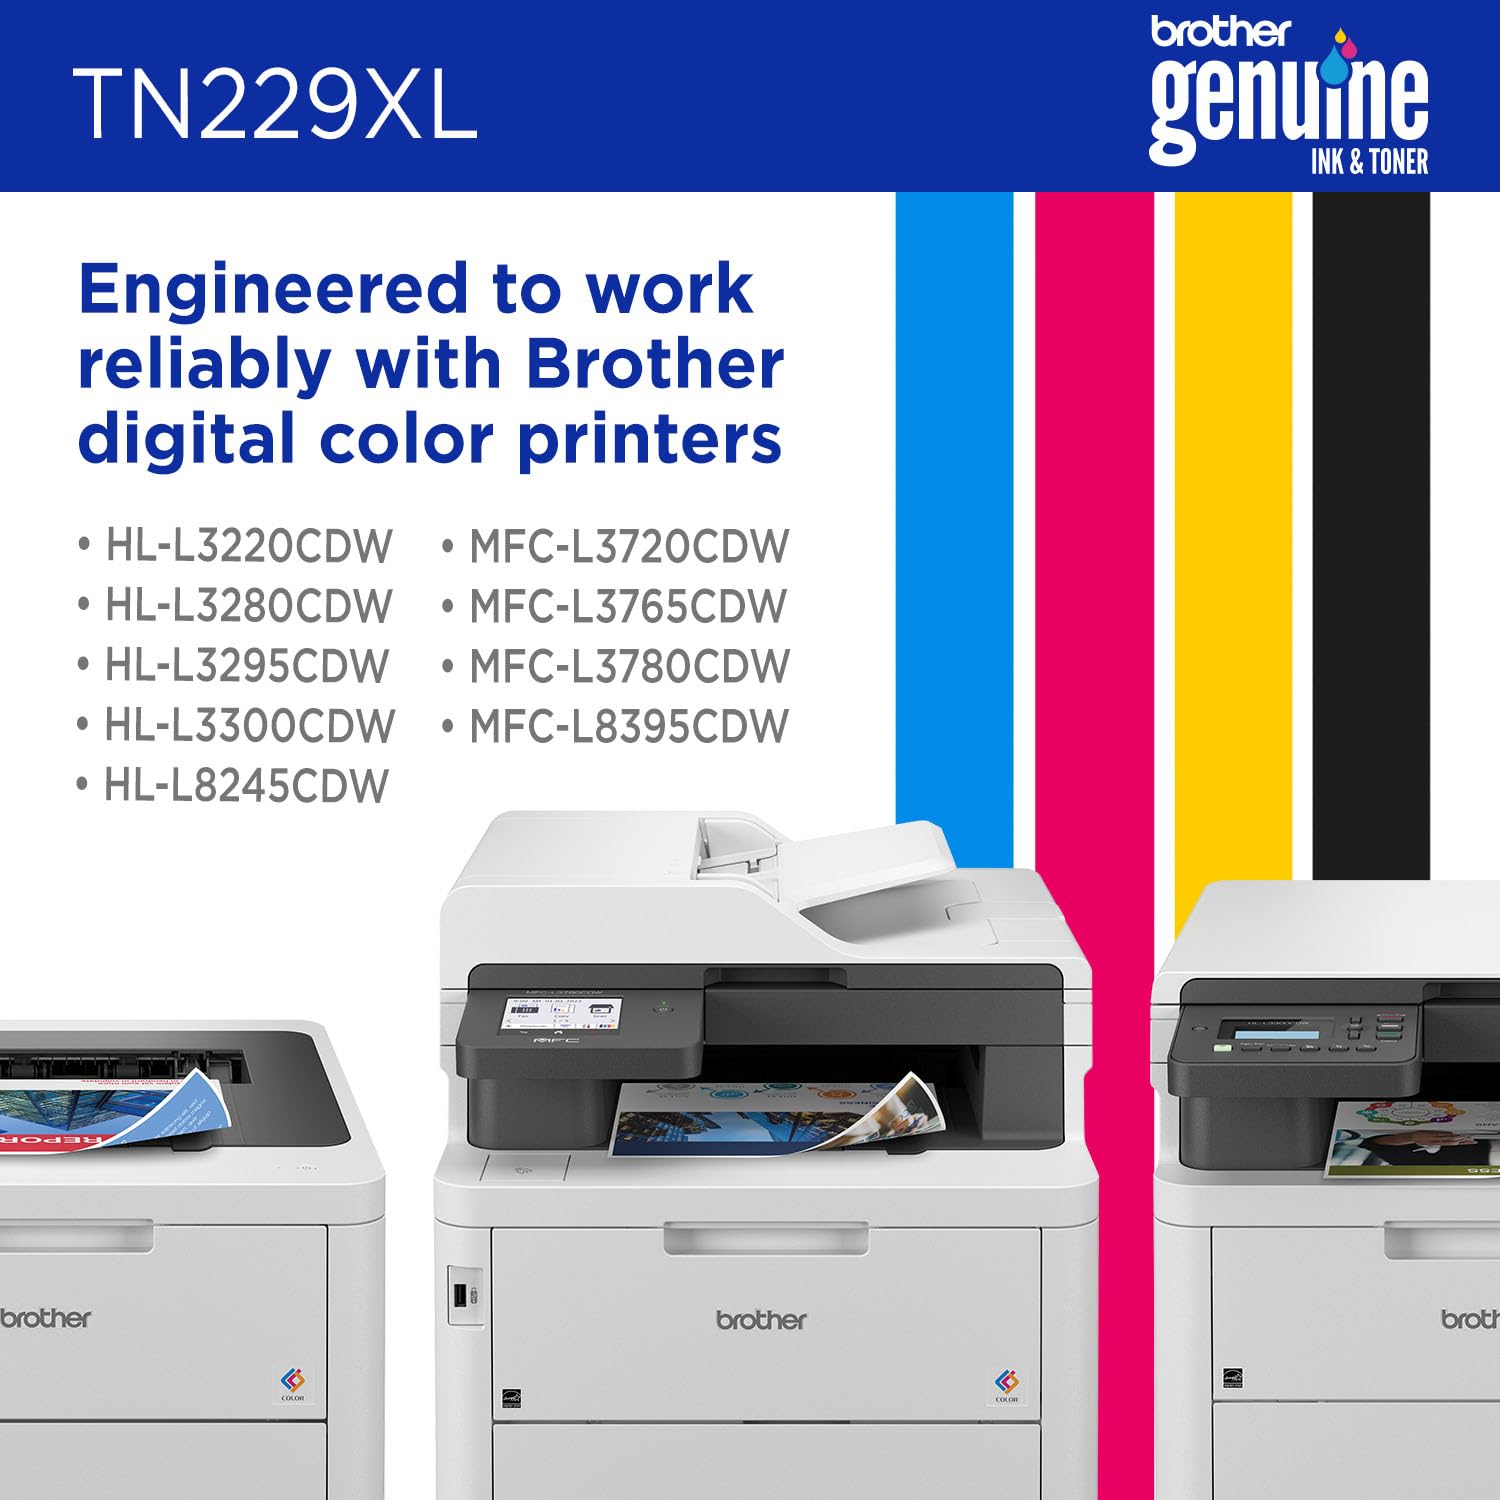 Brother Genuine TN229XLM Magenta High Yield Printer Toner Cartridge - Print up to 2,300 Pages(1)